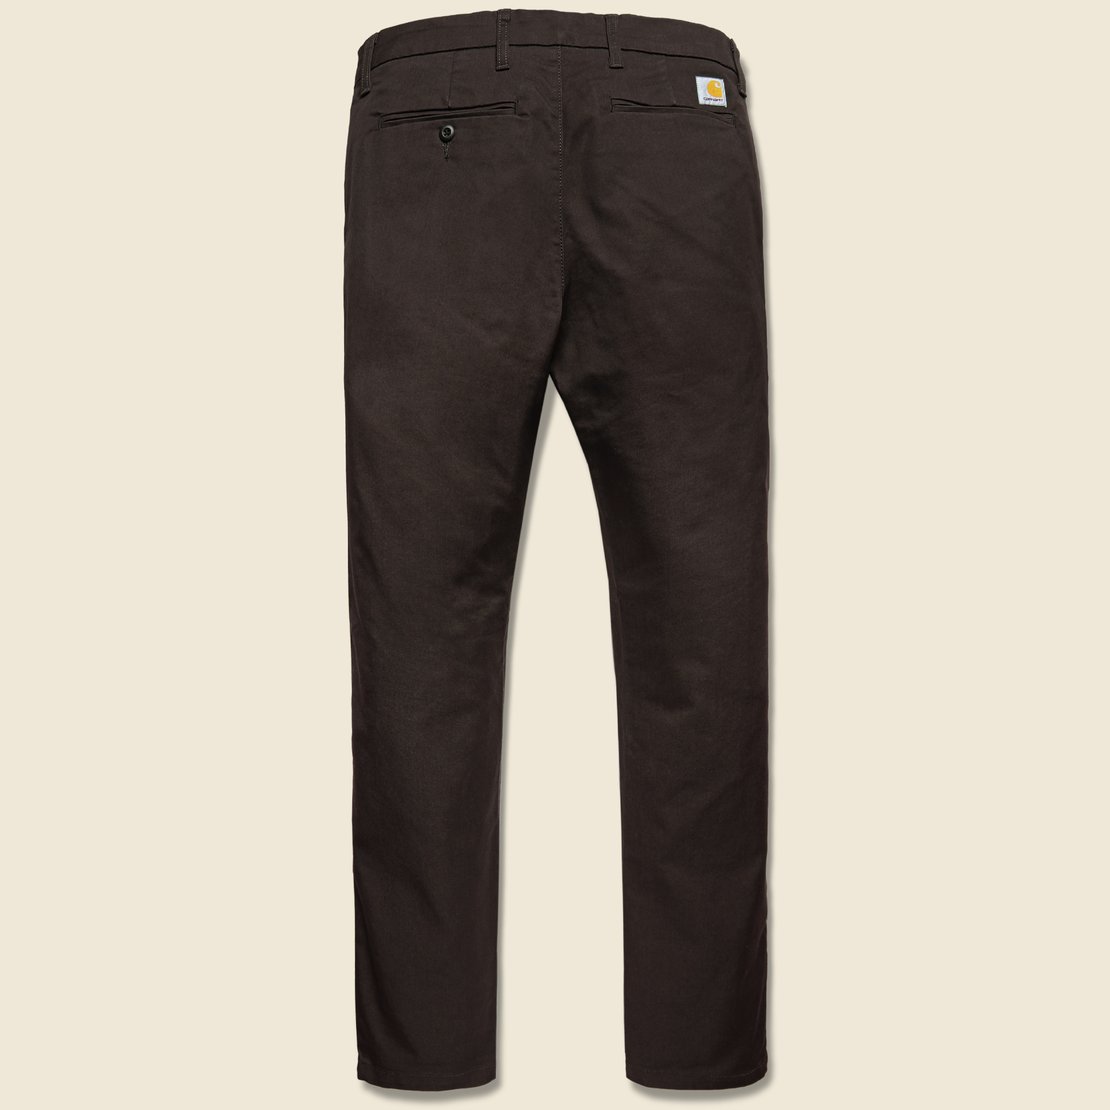 Sid Pant - Tobacco - Carhartt WIP - STAG Provisions - Pants - Twill